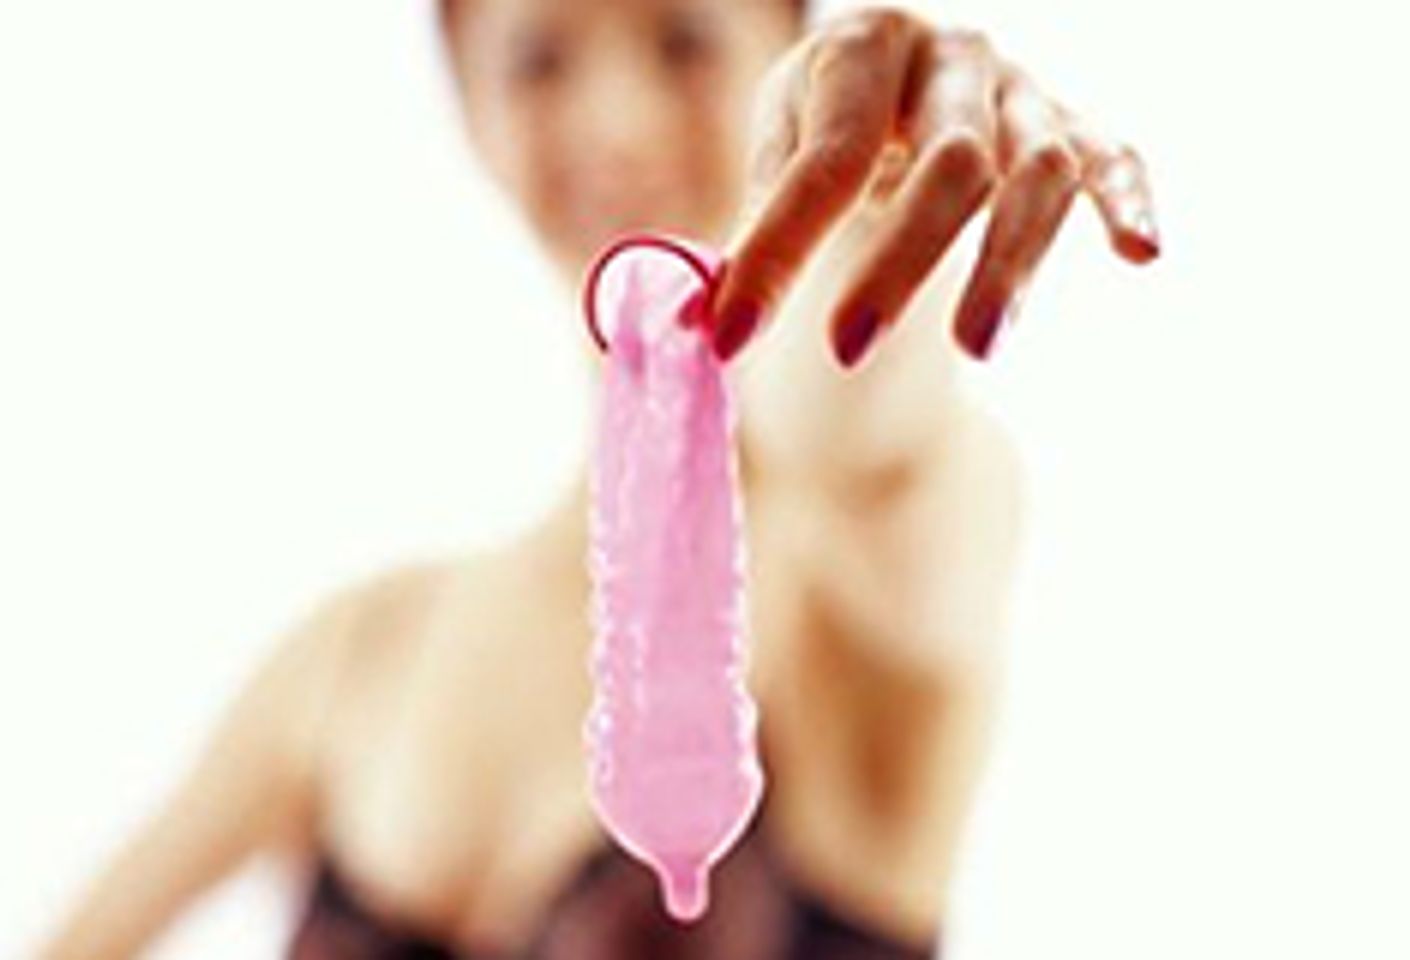 Indian Officials Distribute Condoms in Porn Theaters